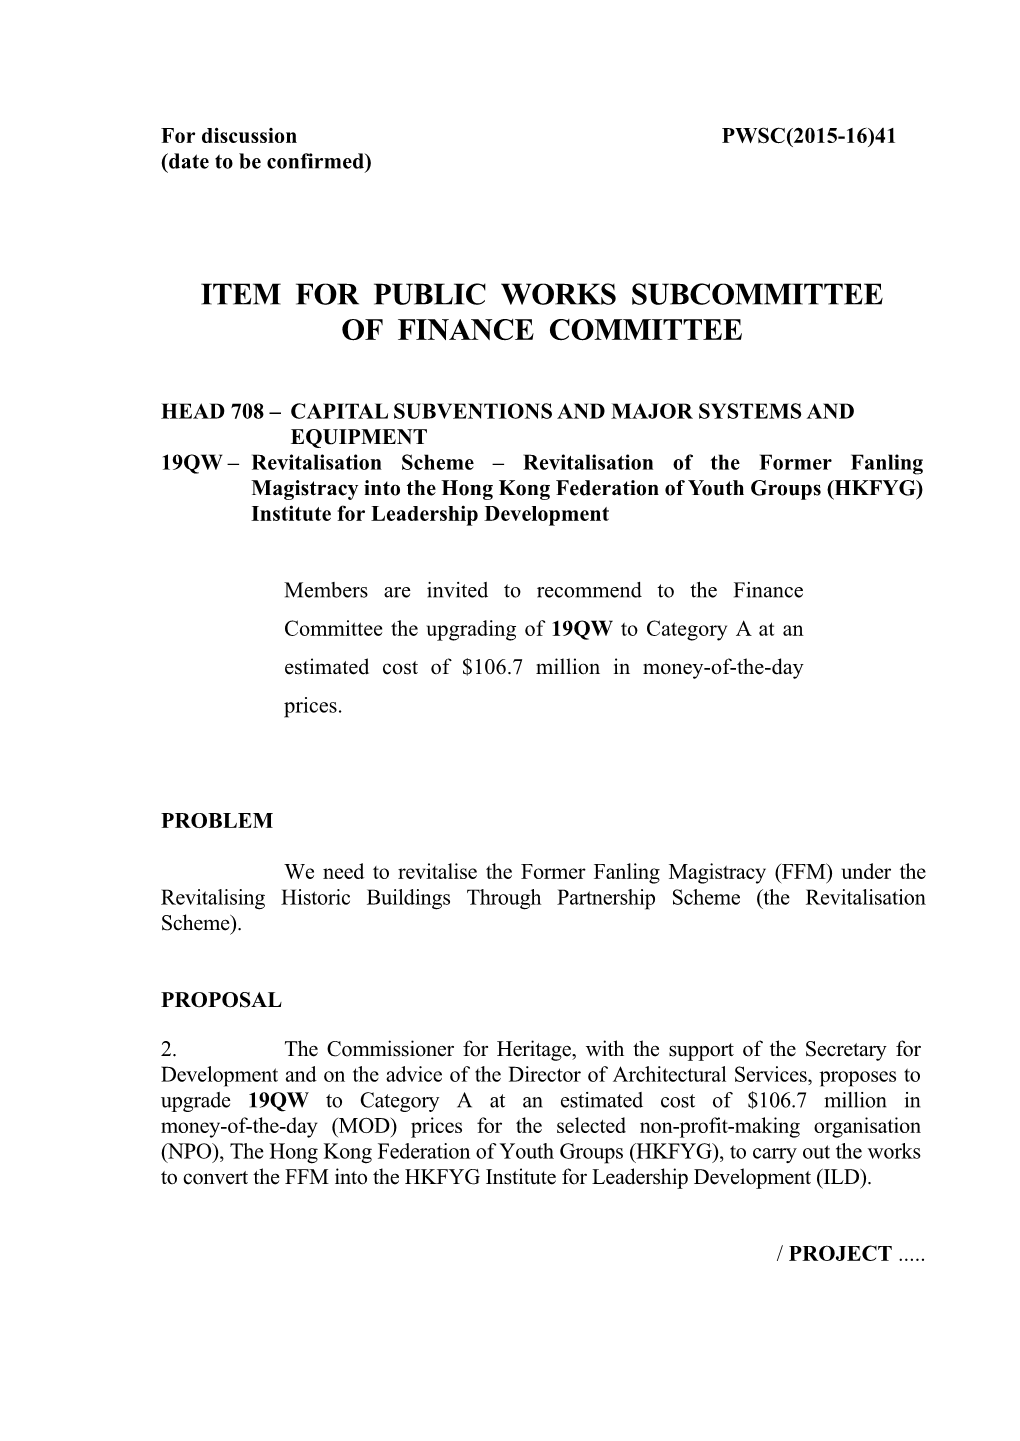 Item for Public Works Subcommittee of Finance Committee